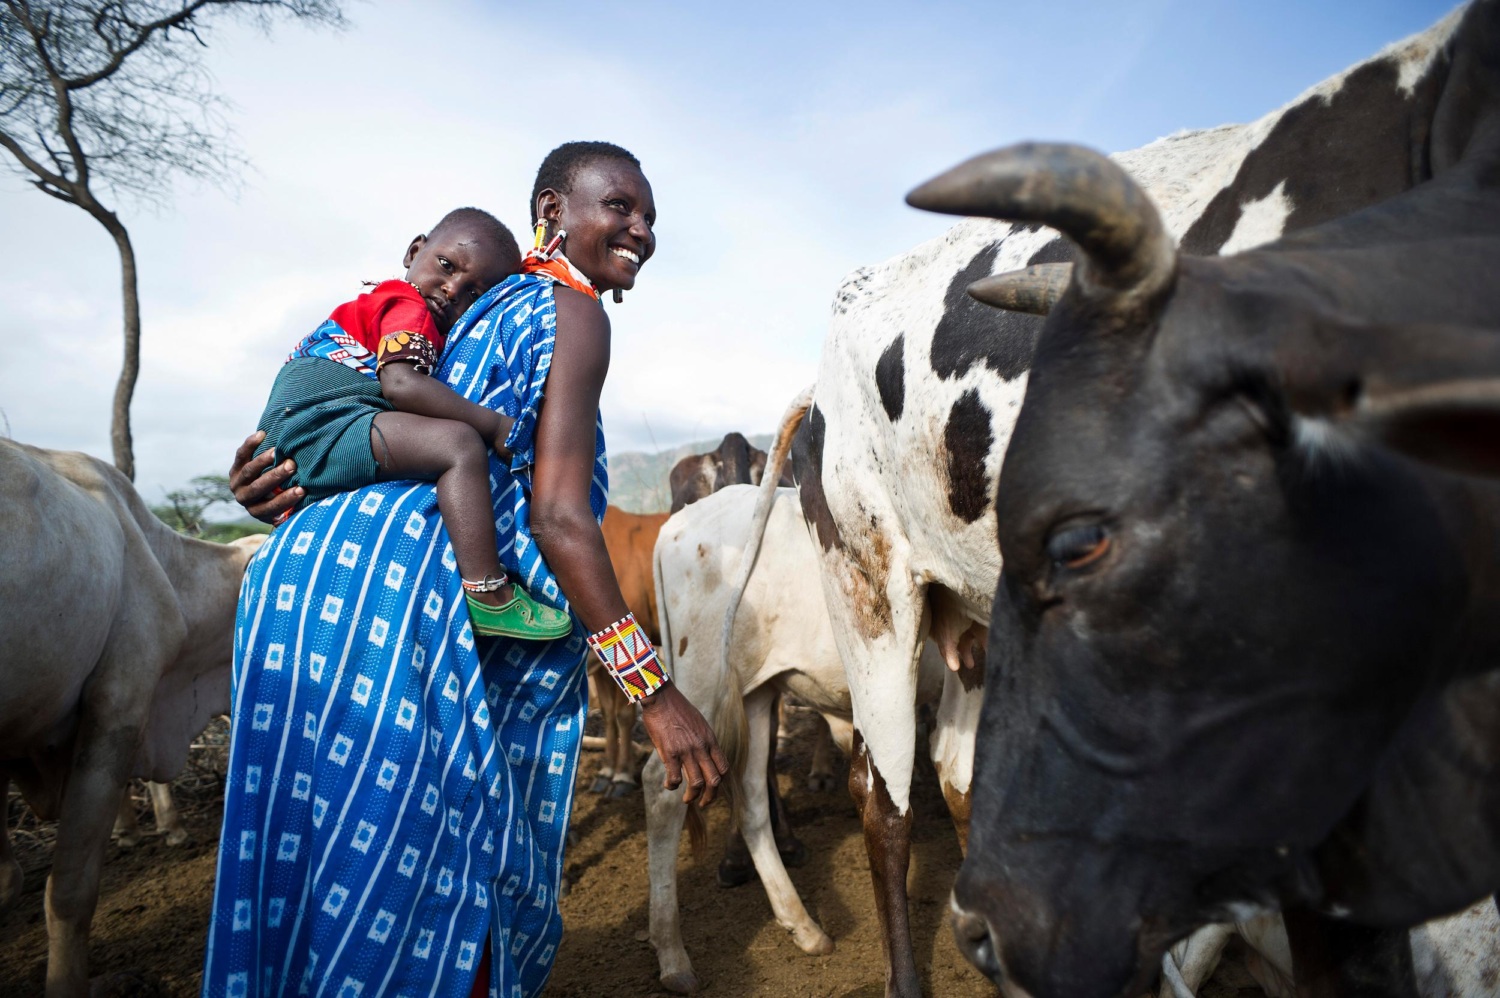 Maasai woman with baby on her back smiles while standing next to cattle